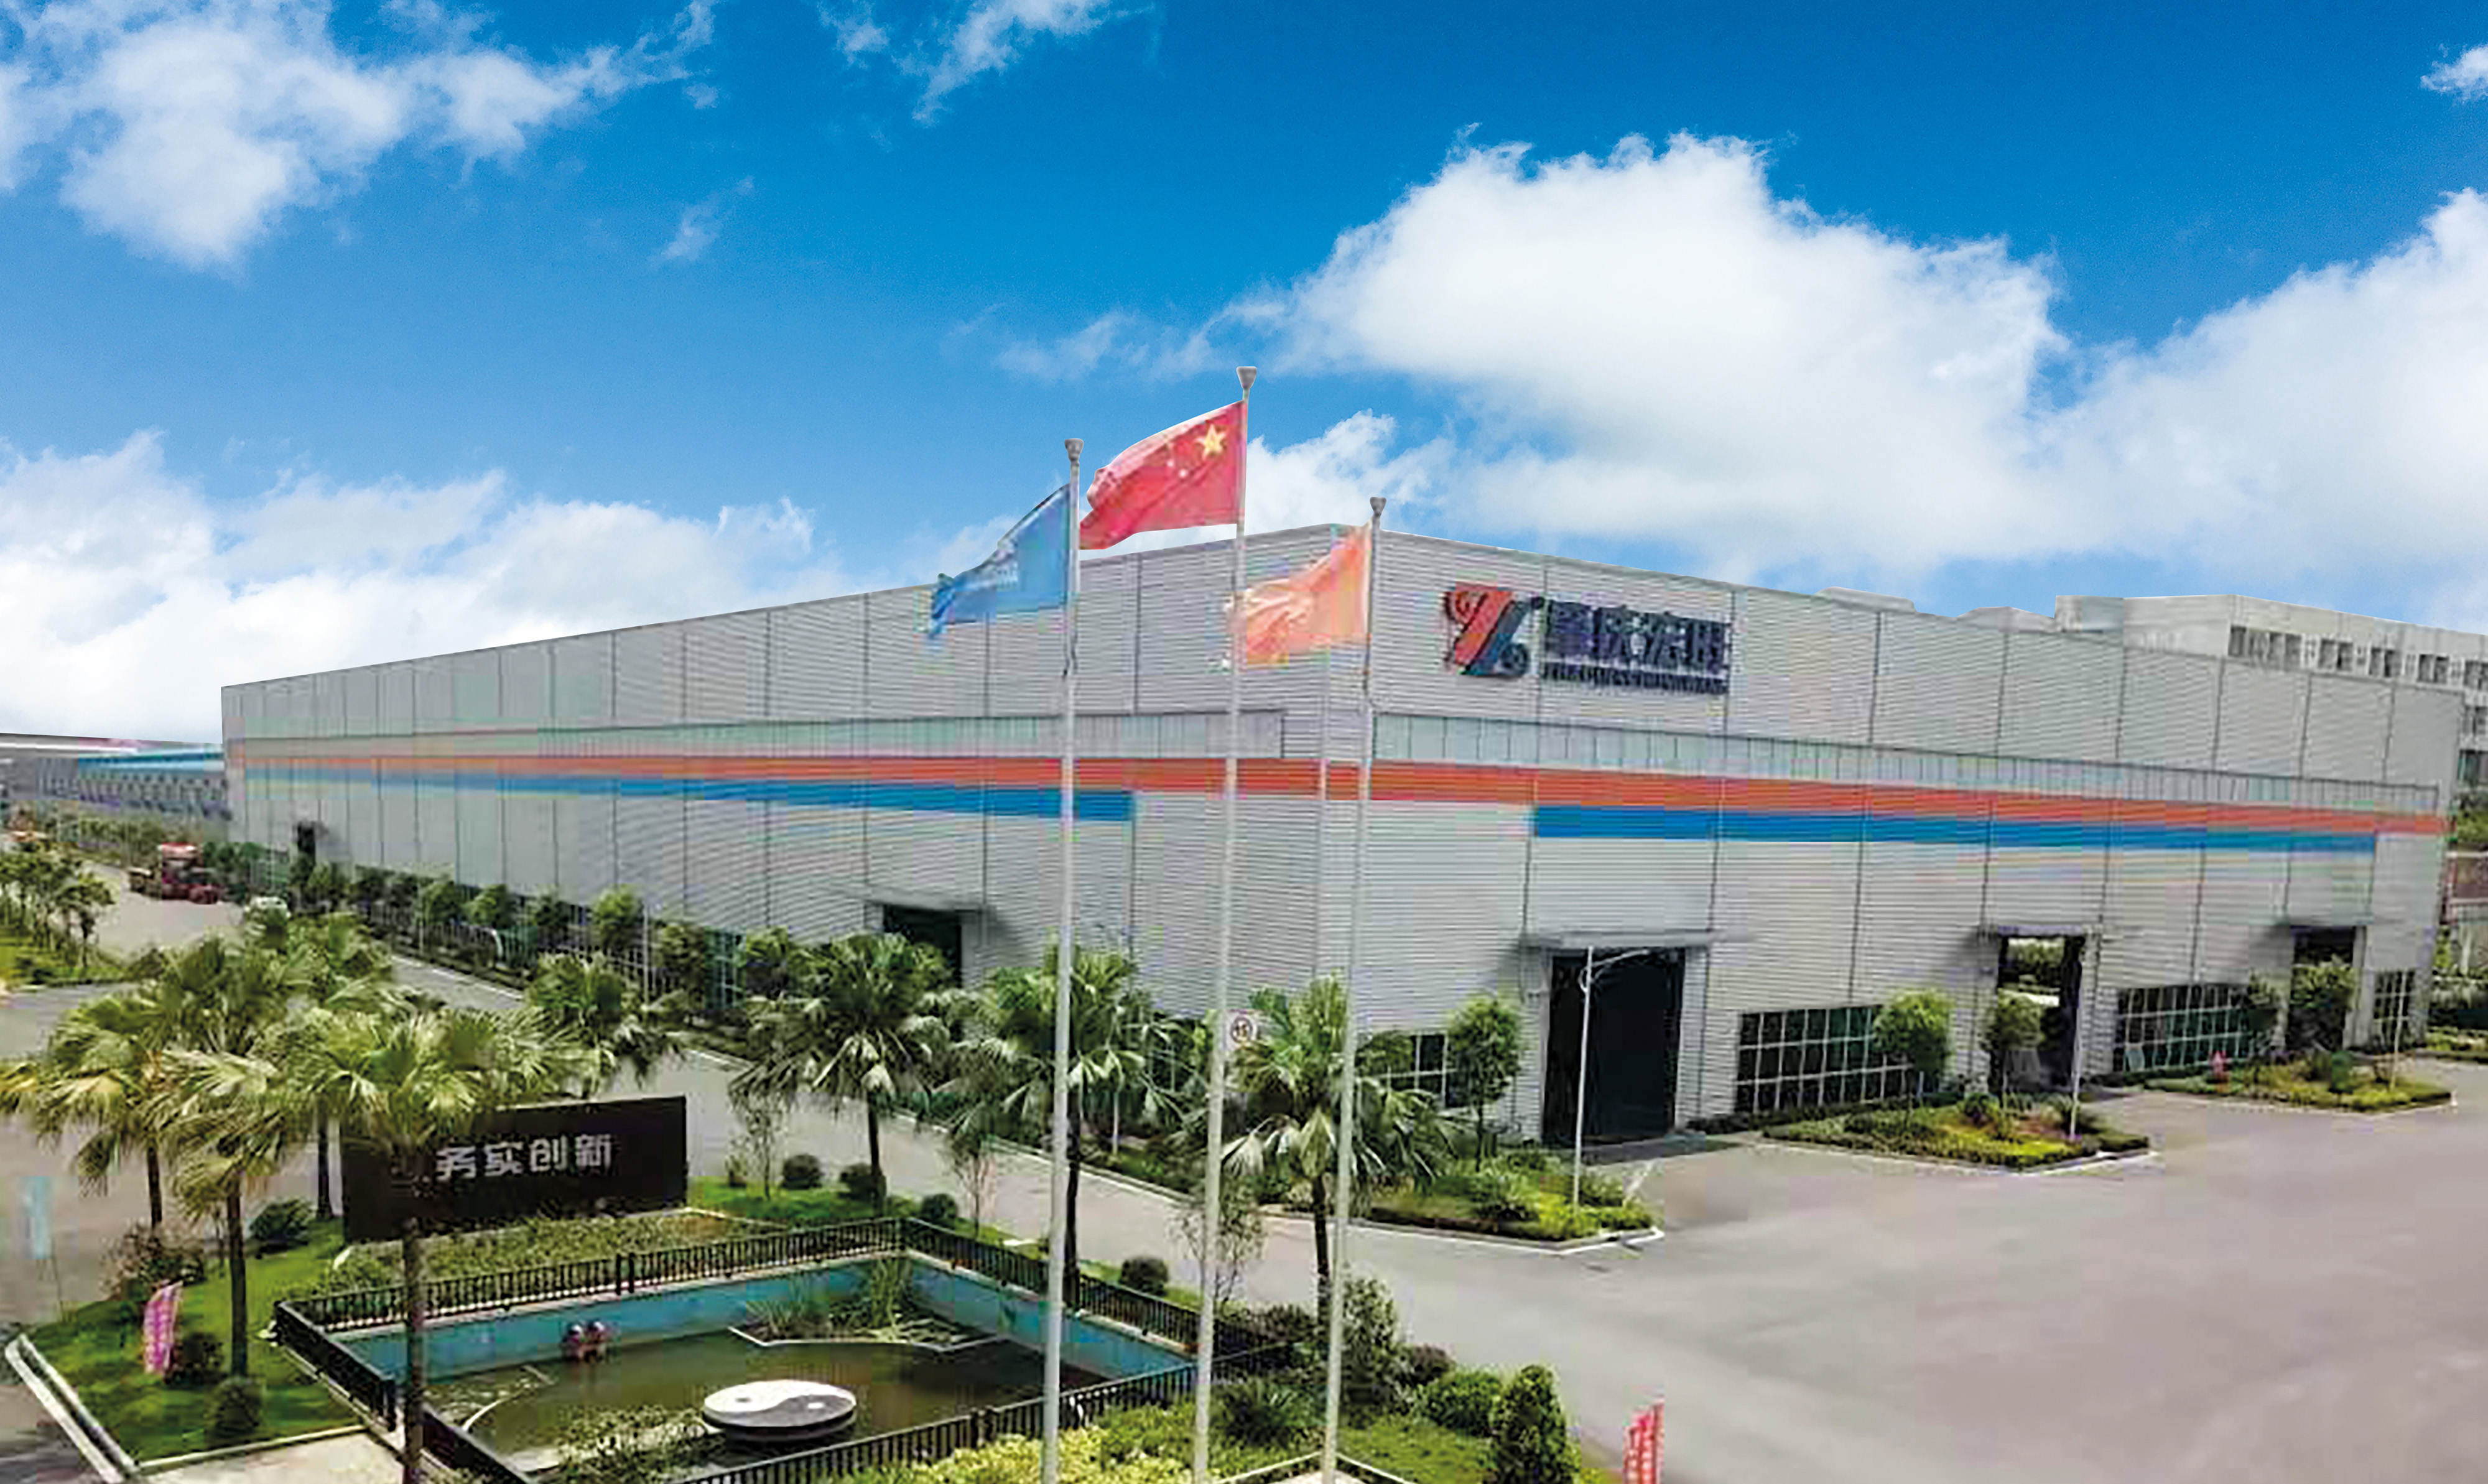 Foshan Hermdeco steel co., LTD., founded in 2006, belongs to hongwang group and has been committed to the innovation and quality of stainless steel for more than 10 years.At present, the company has developed into a set of stainless steel material design, processing as one of the large comprehensive enterprises.